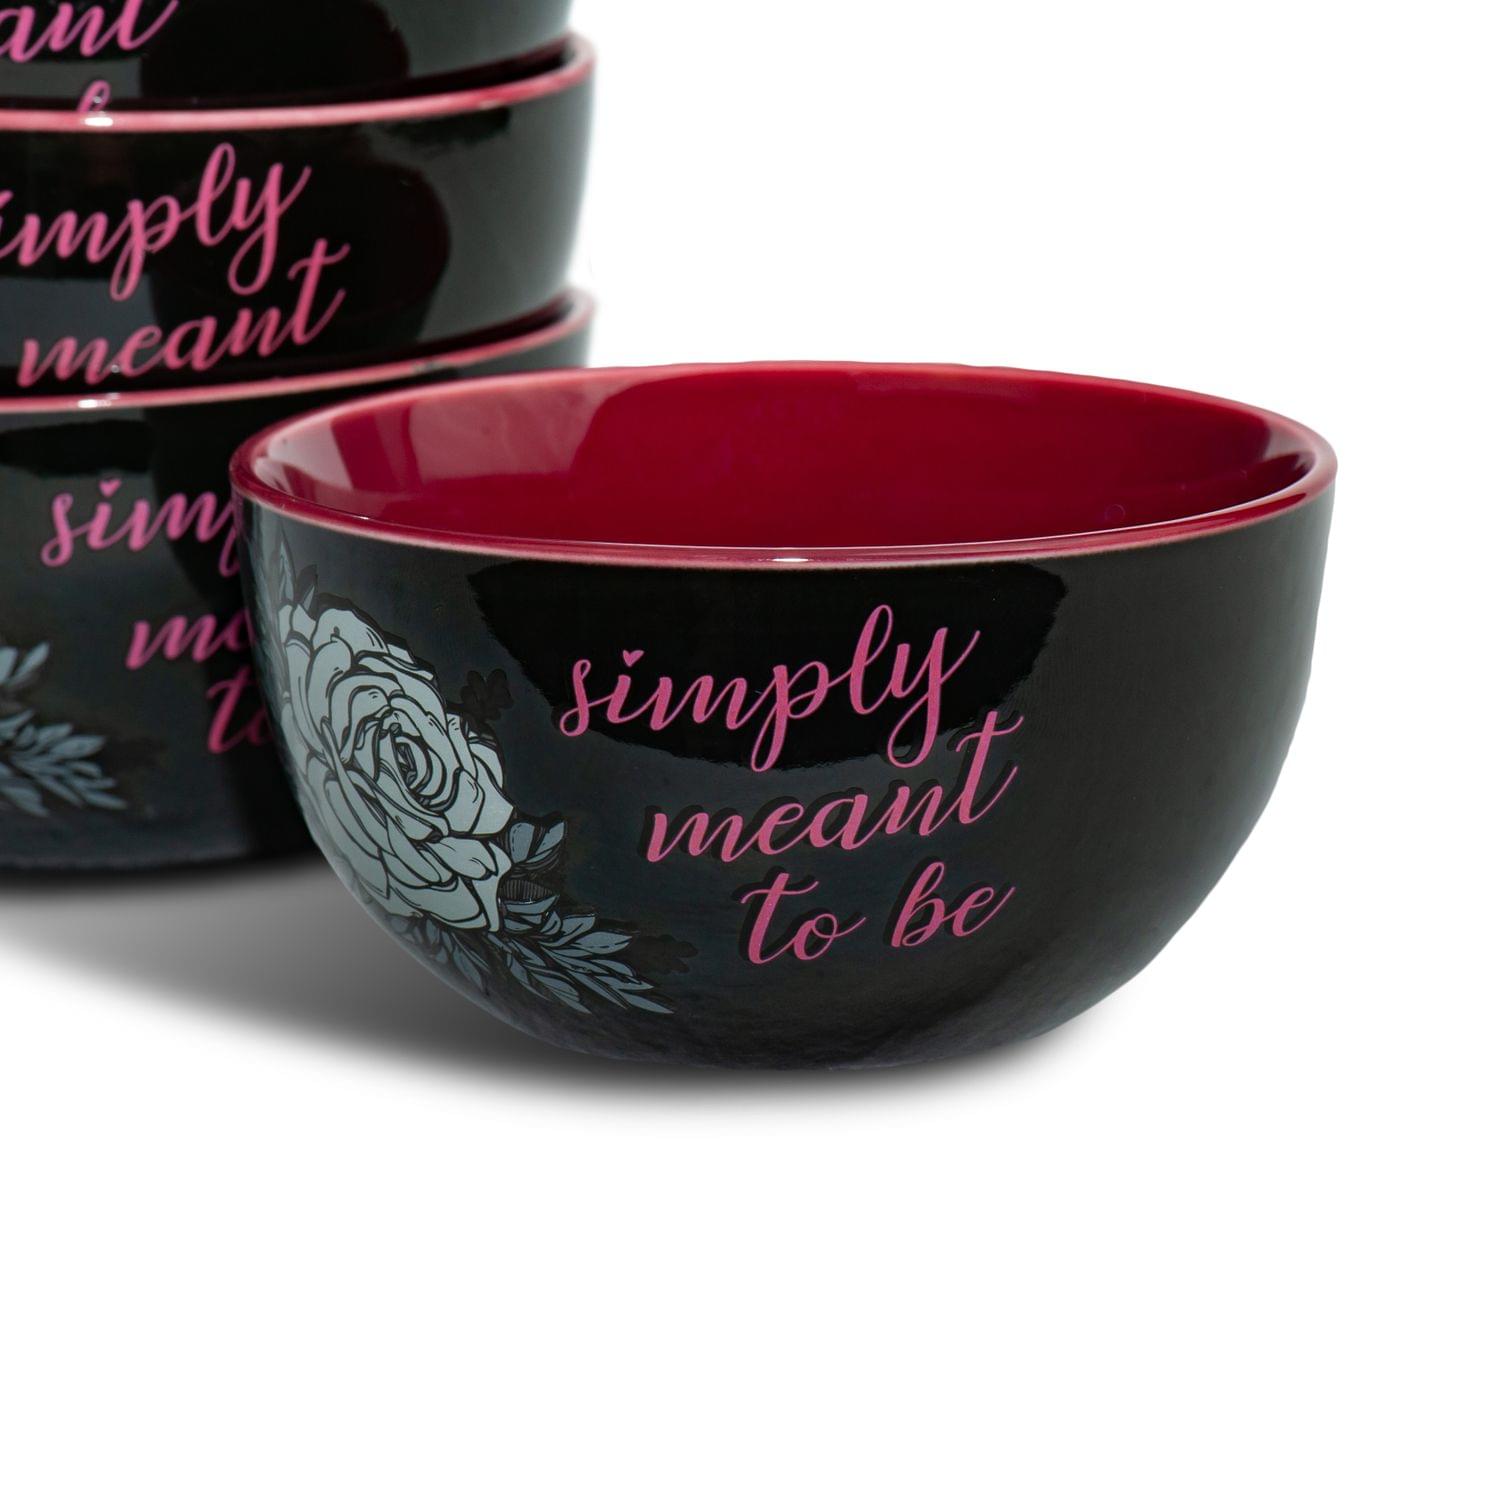 OFFICIAL Nightmare Before Christmas Ceramic Bowl | Feat. Jack & Sally | Set of 4